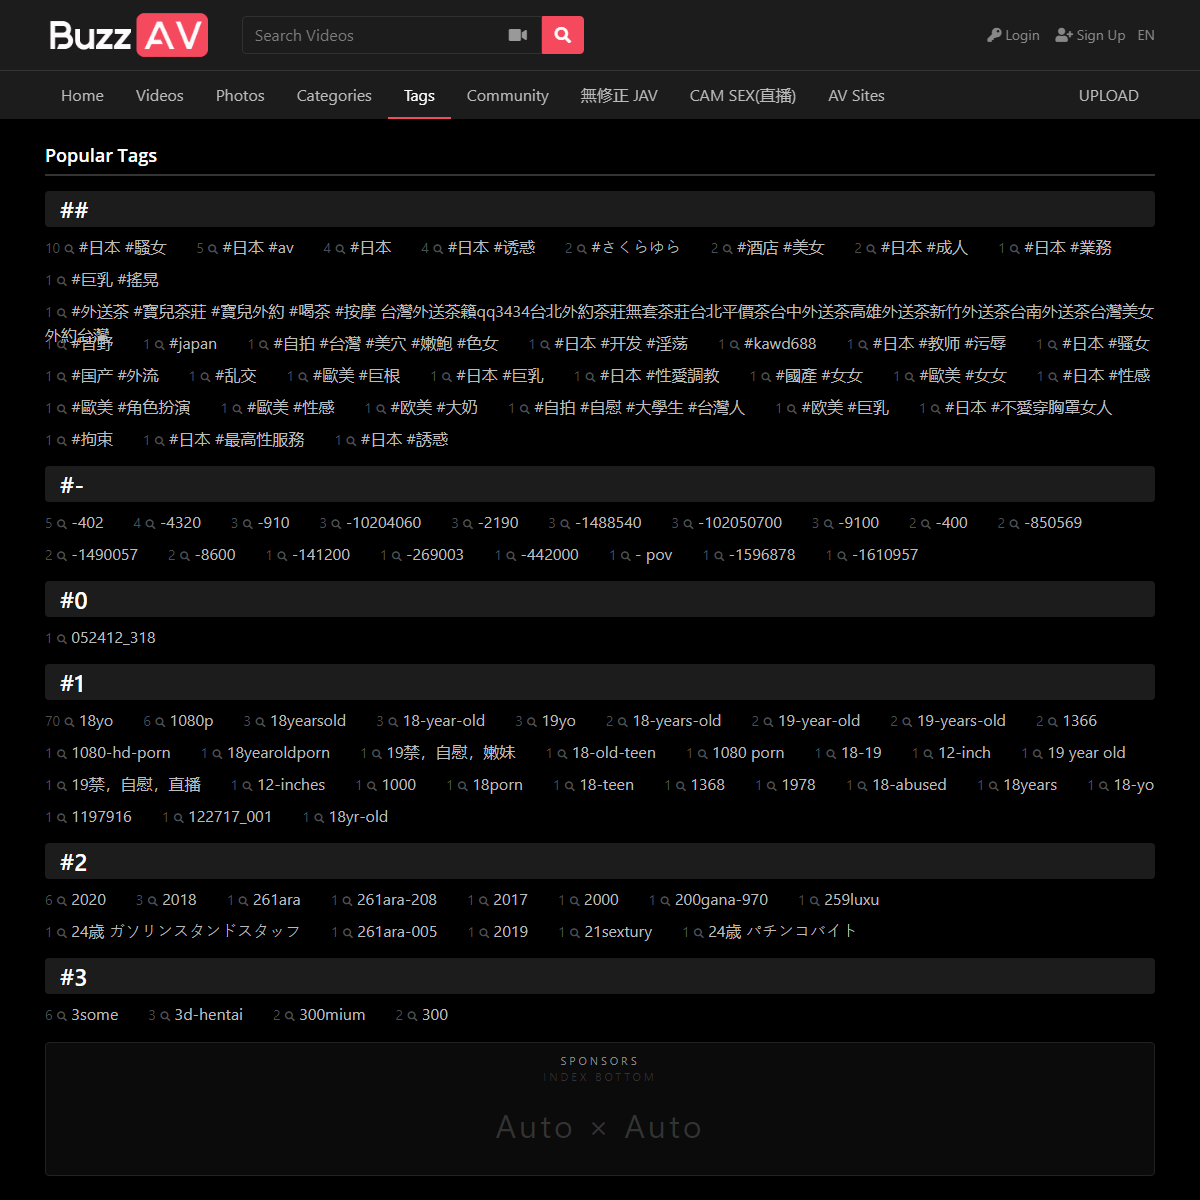 A complete backup of https://www.buzzav.com/tags